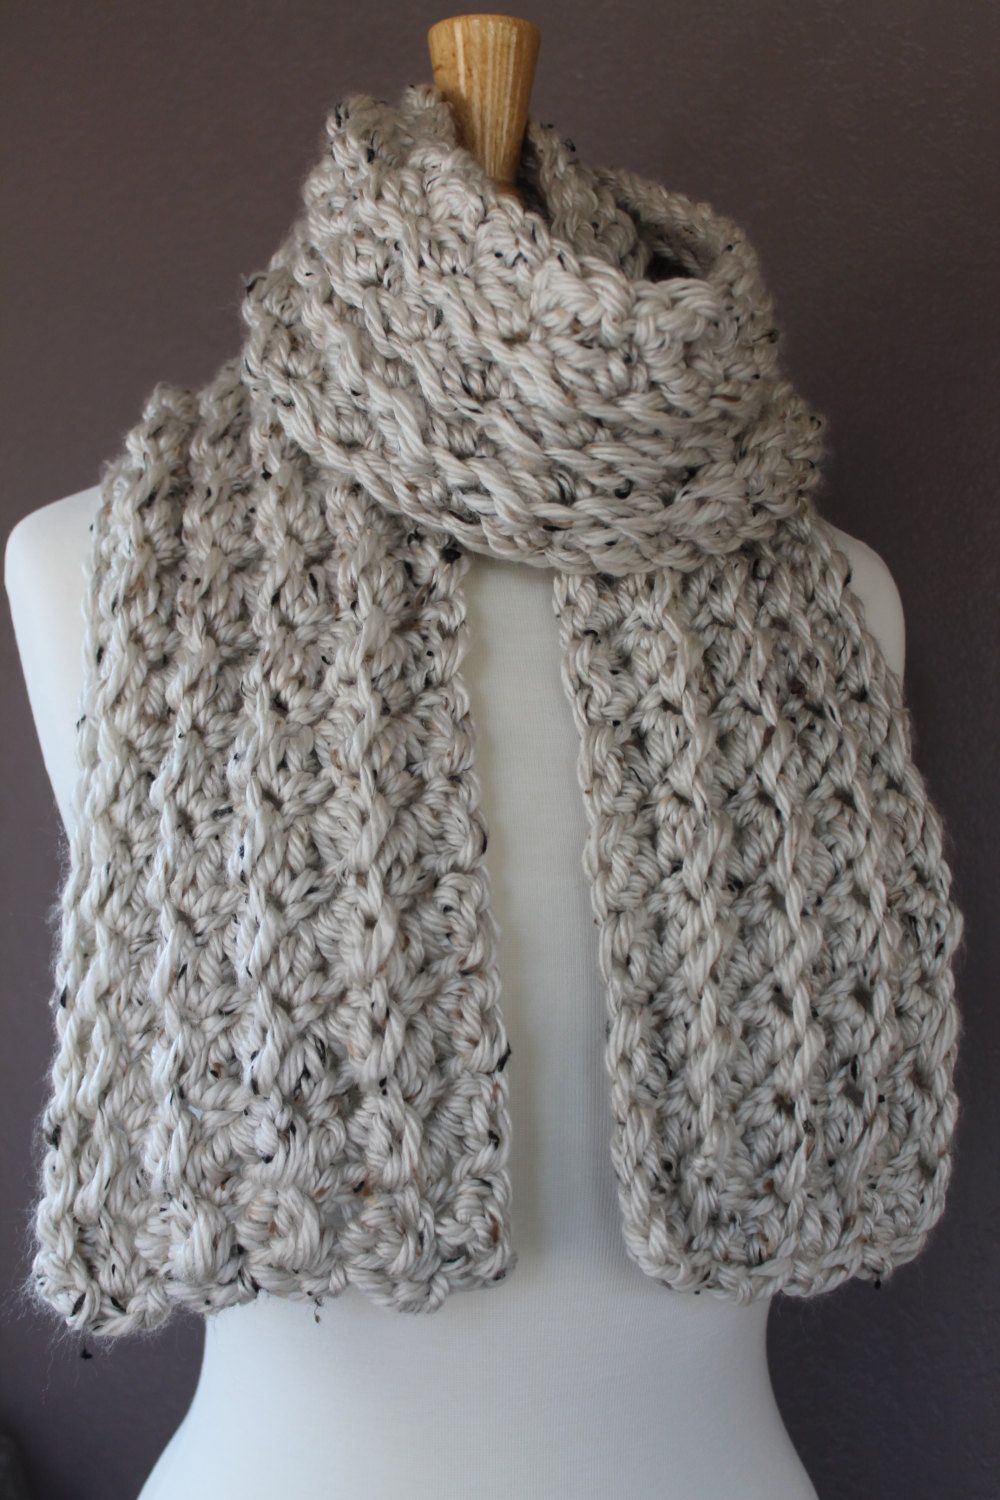 Easy Scarf Crochet Patterns Come And Check Out This Very Easy Crochet Scarf Pattern From Crafty